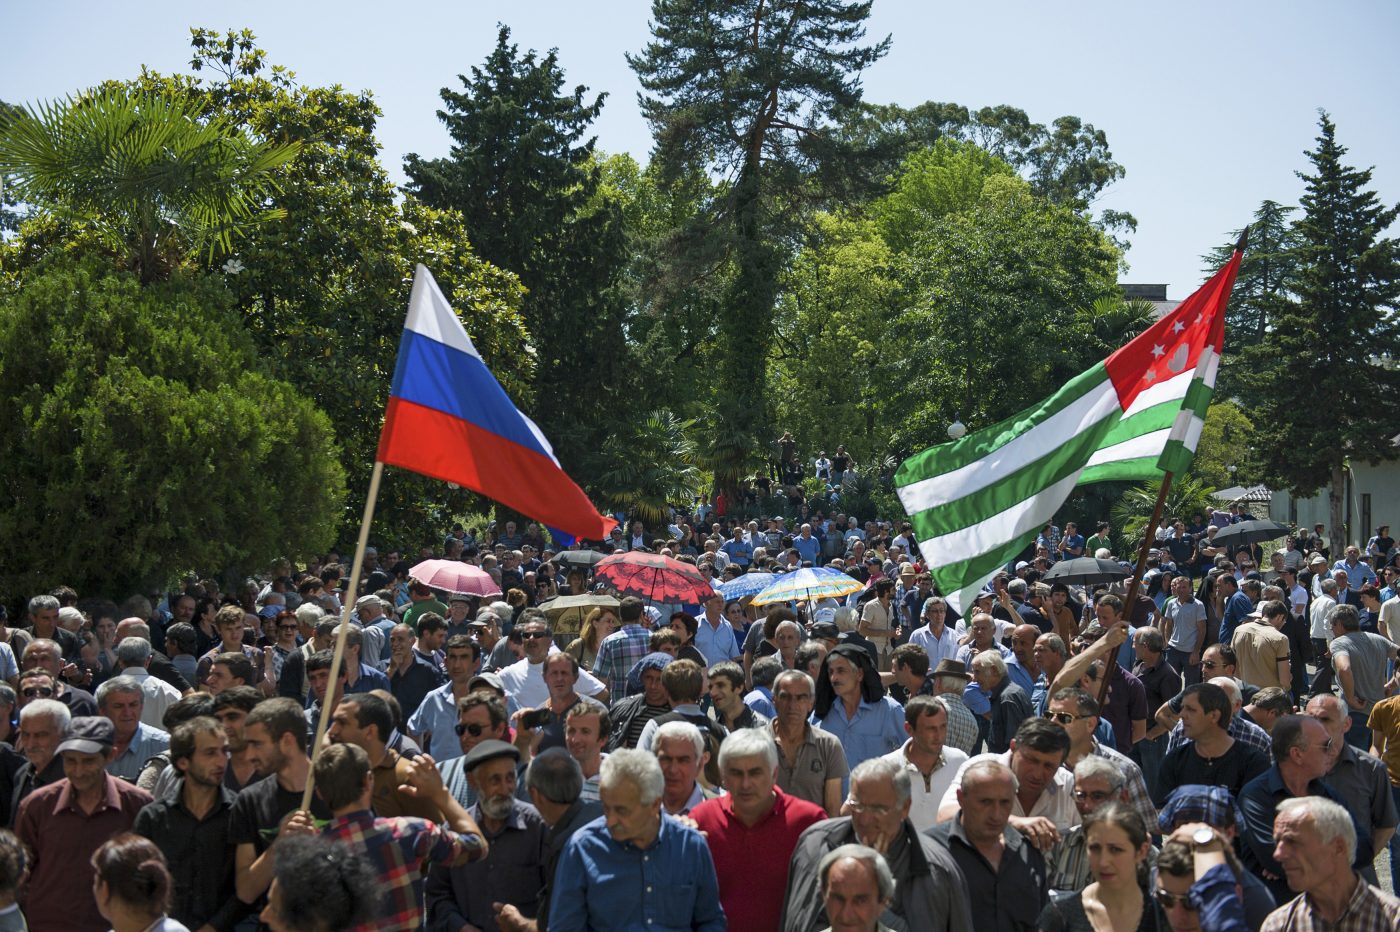 Photo: Opposition protesters gather outside the presidential headquarters in Sukhumi, the capital of Georgia's breakaway region of Abkhazia May 28, 2014. Russia expressed concern on Wednesday over unrest in Abkhazia, where demonstrators have seized control of the presidential administration headquarters in what the leader of the Moscow-backed breakaway province of Georgia called an attempted coup. Credit: REUTERS/Nina Zotina (GEORGIA - Tags: POLITICS CIVIL UNREST)